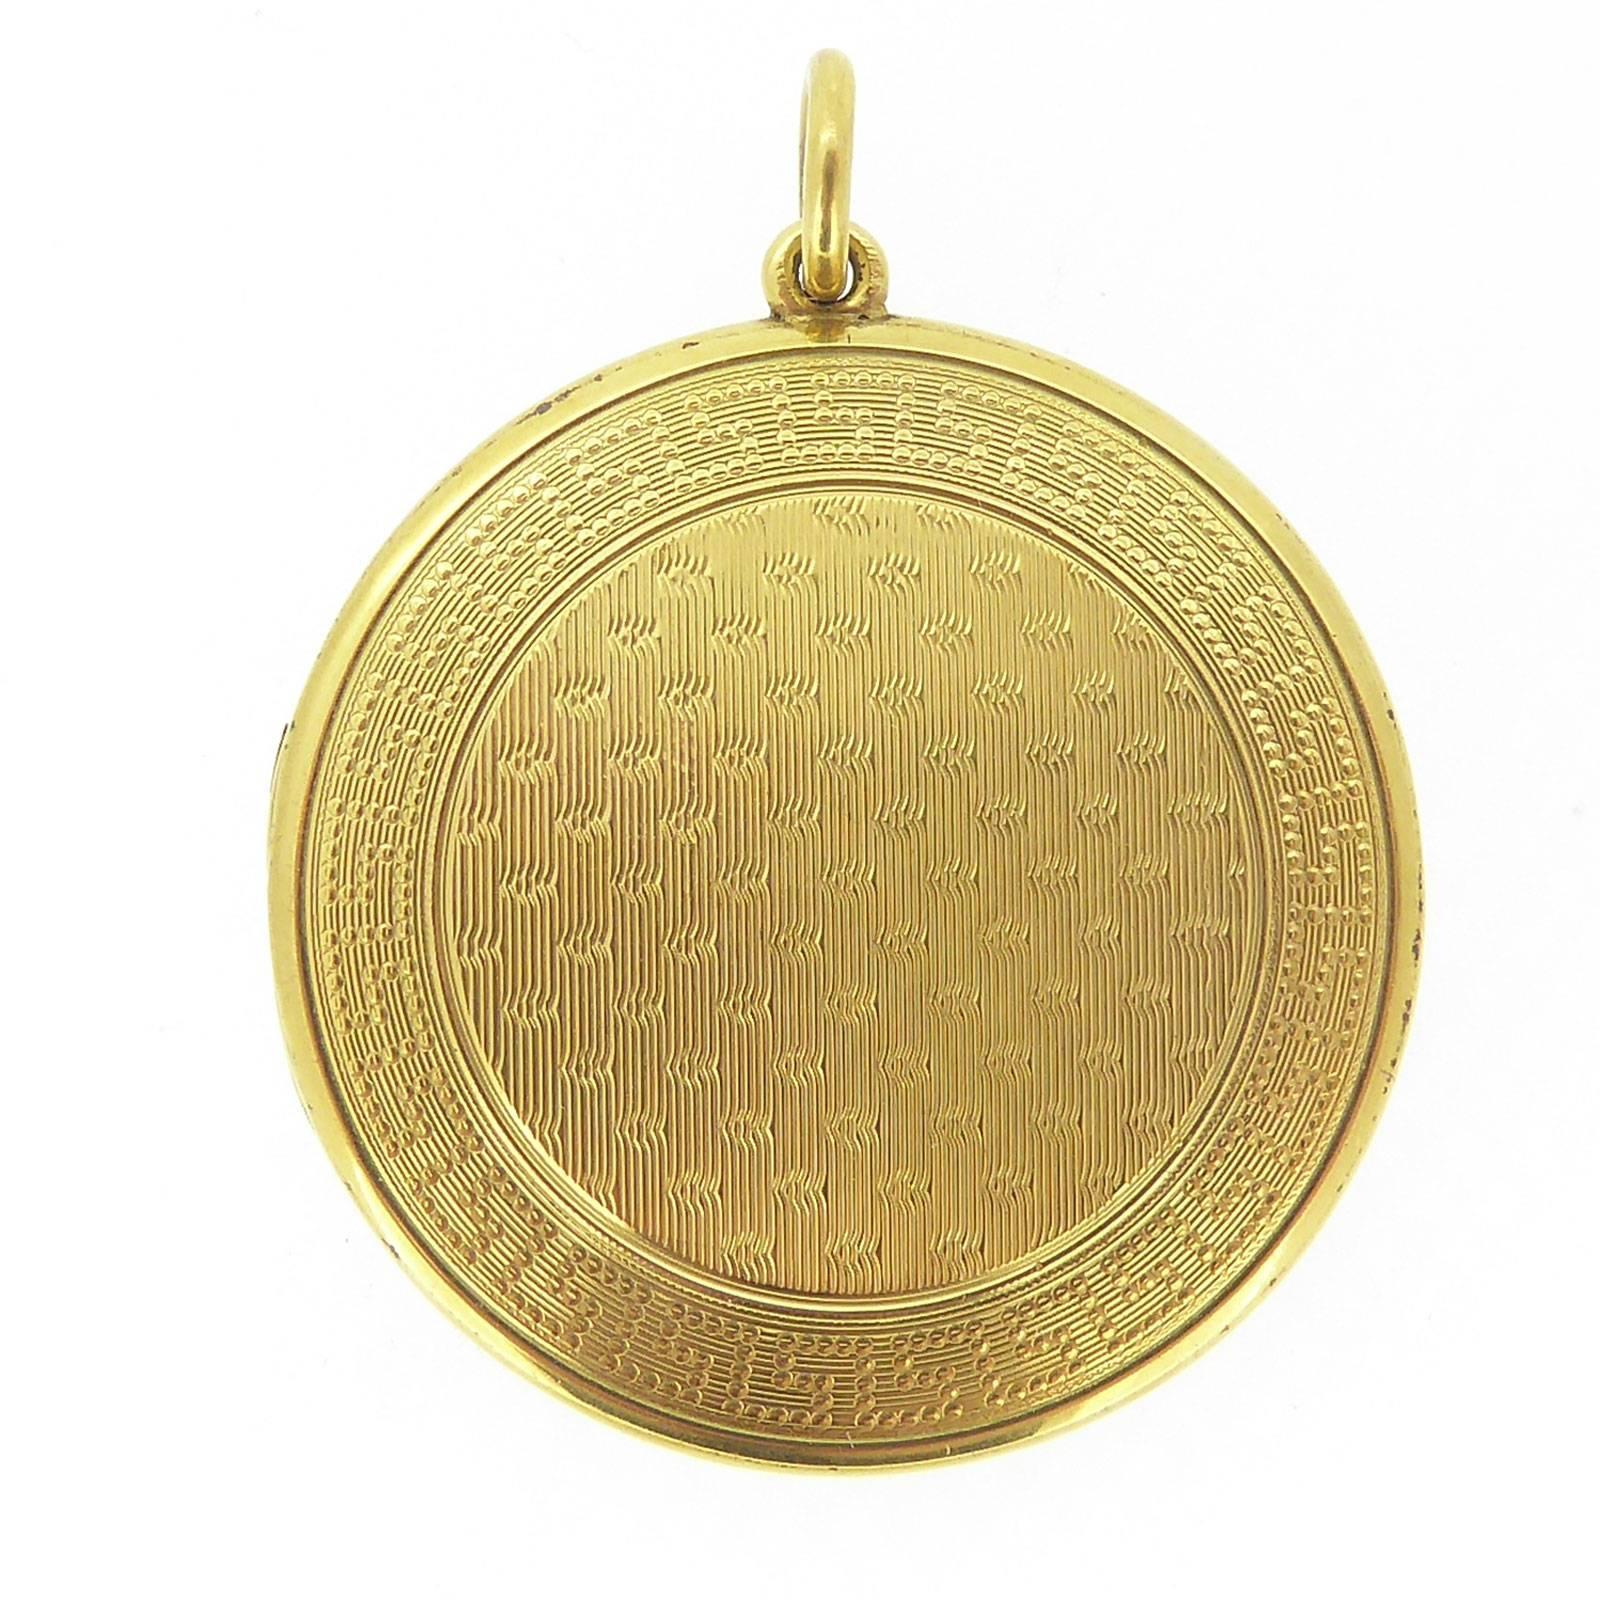 A beautiful Edwardian picture locket in yellow gold.  With a very tactile quality the locket is machine engraved to both sides with a central reeded pattern within a Grecian keylock border.  Additionally, the front of the locket has a plain polished